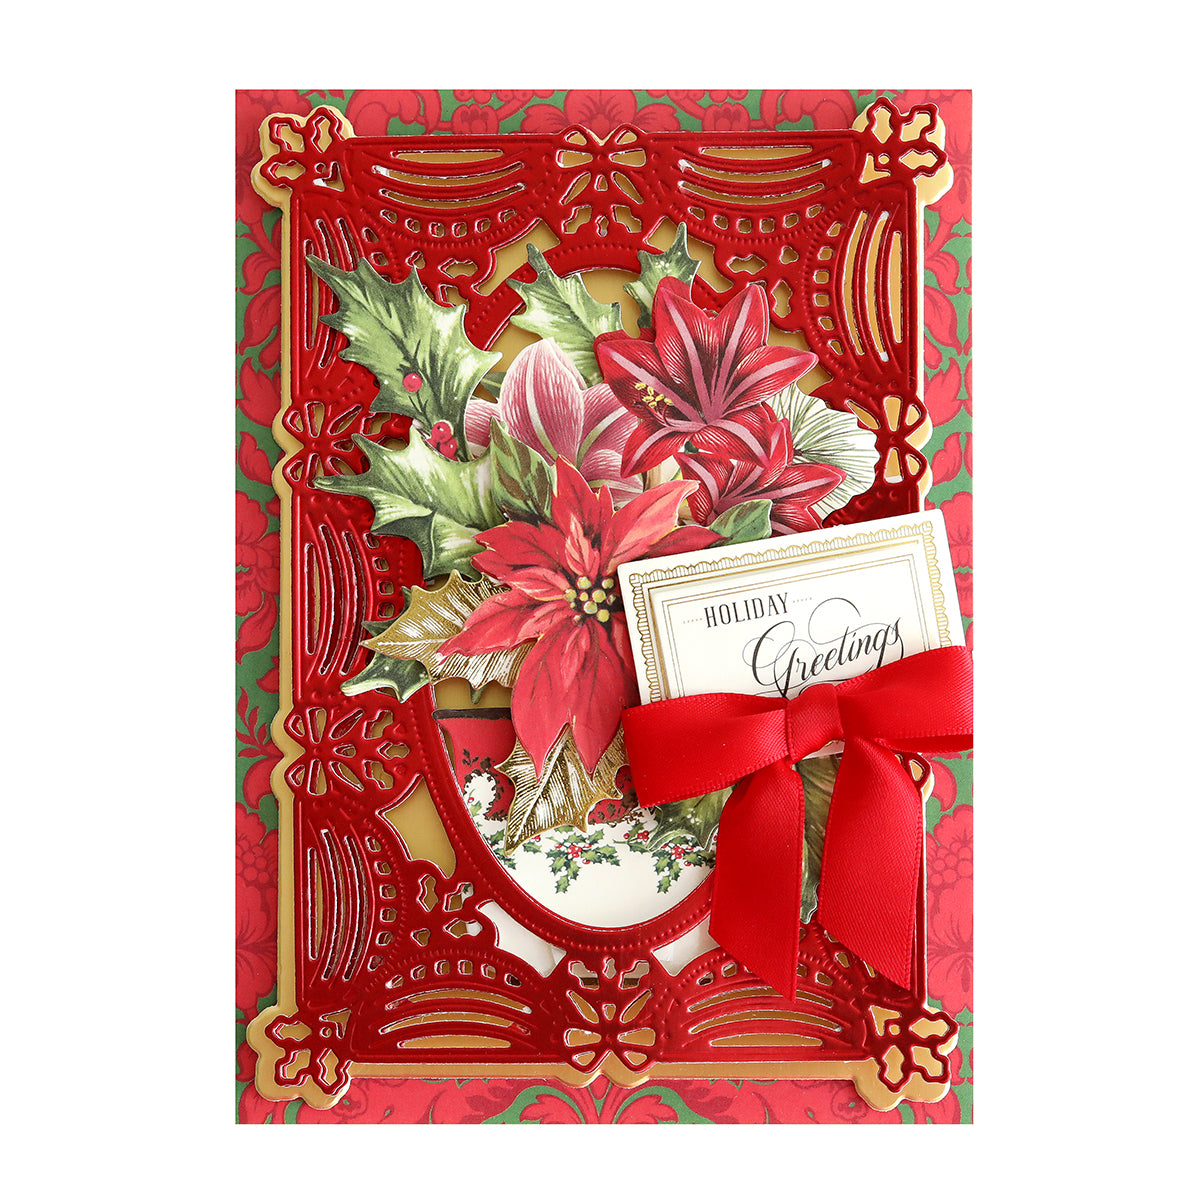 A luxury matte foil Anna Griffin Christmas card adorned with poinsettias and a festive red ribbon.